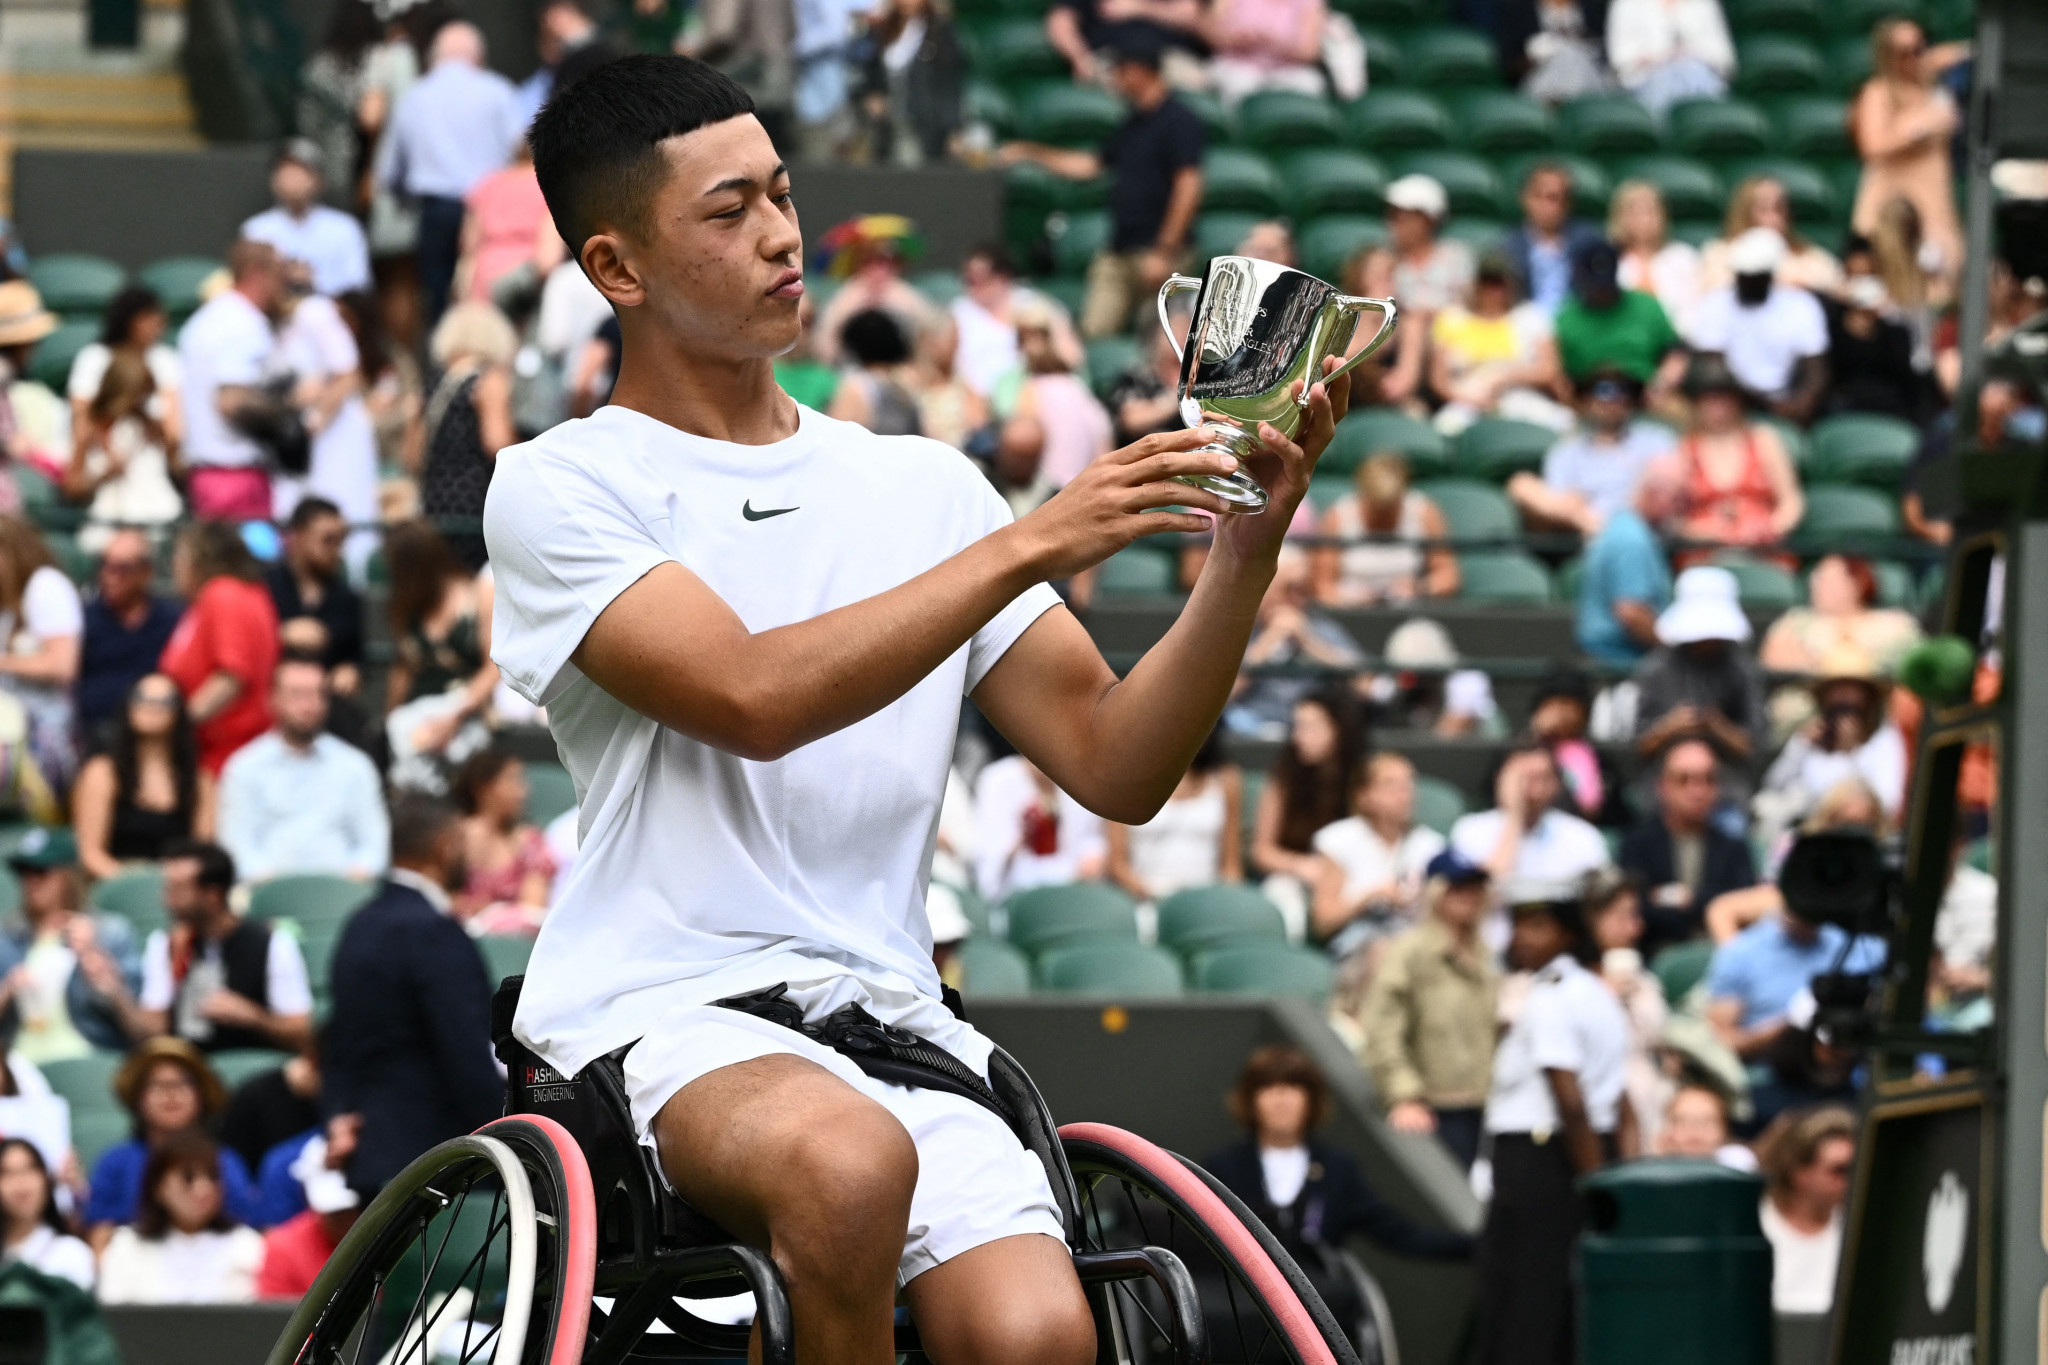 Oda makes Wimbledon history with wheelchair singles title at 17